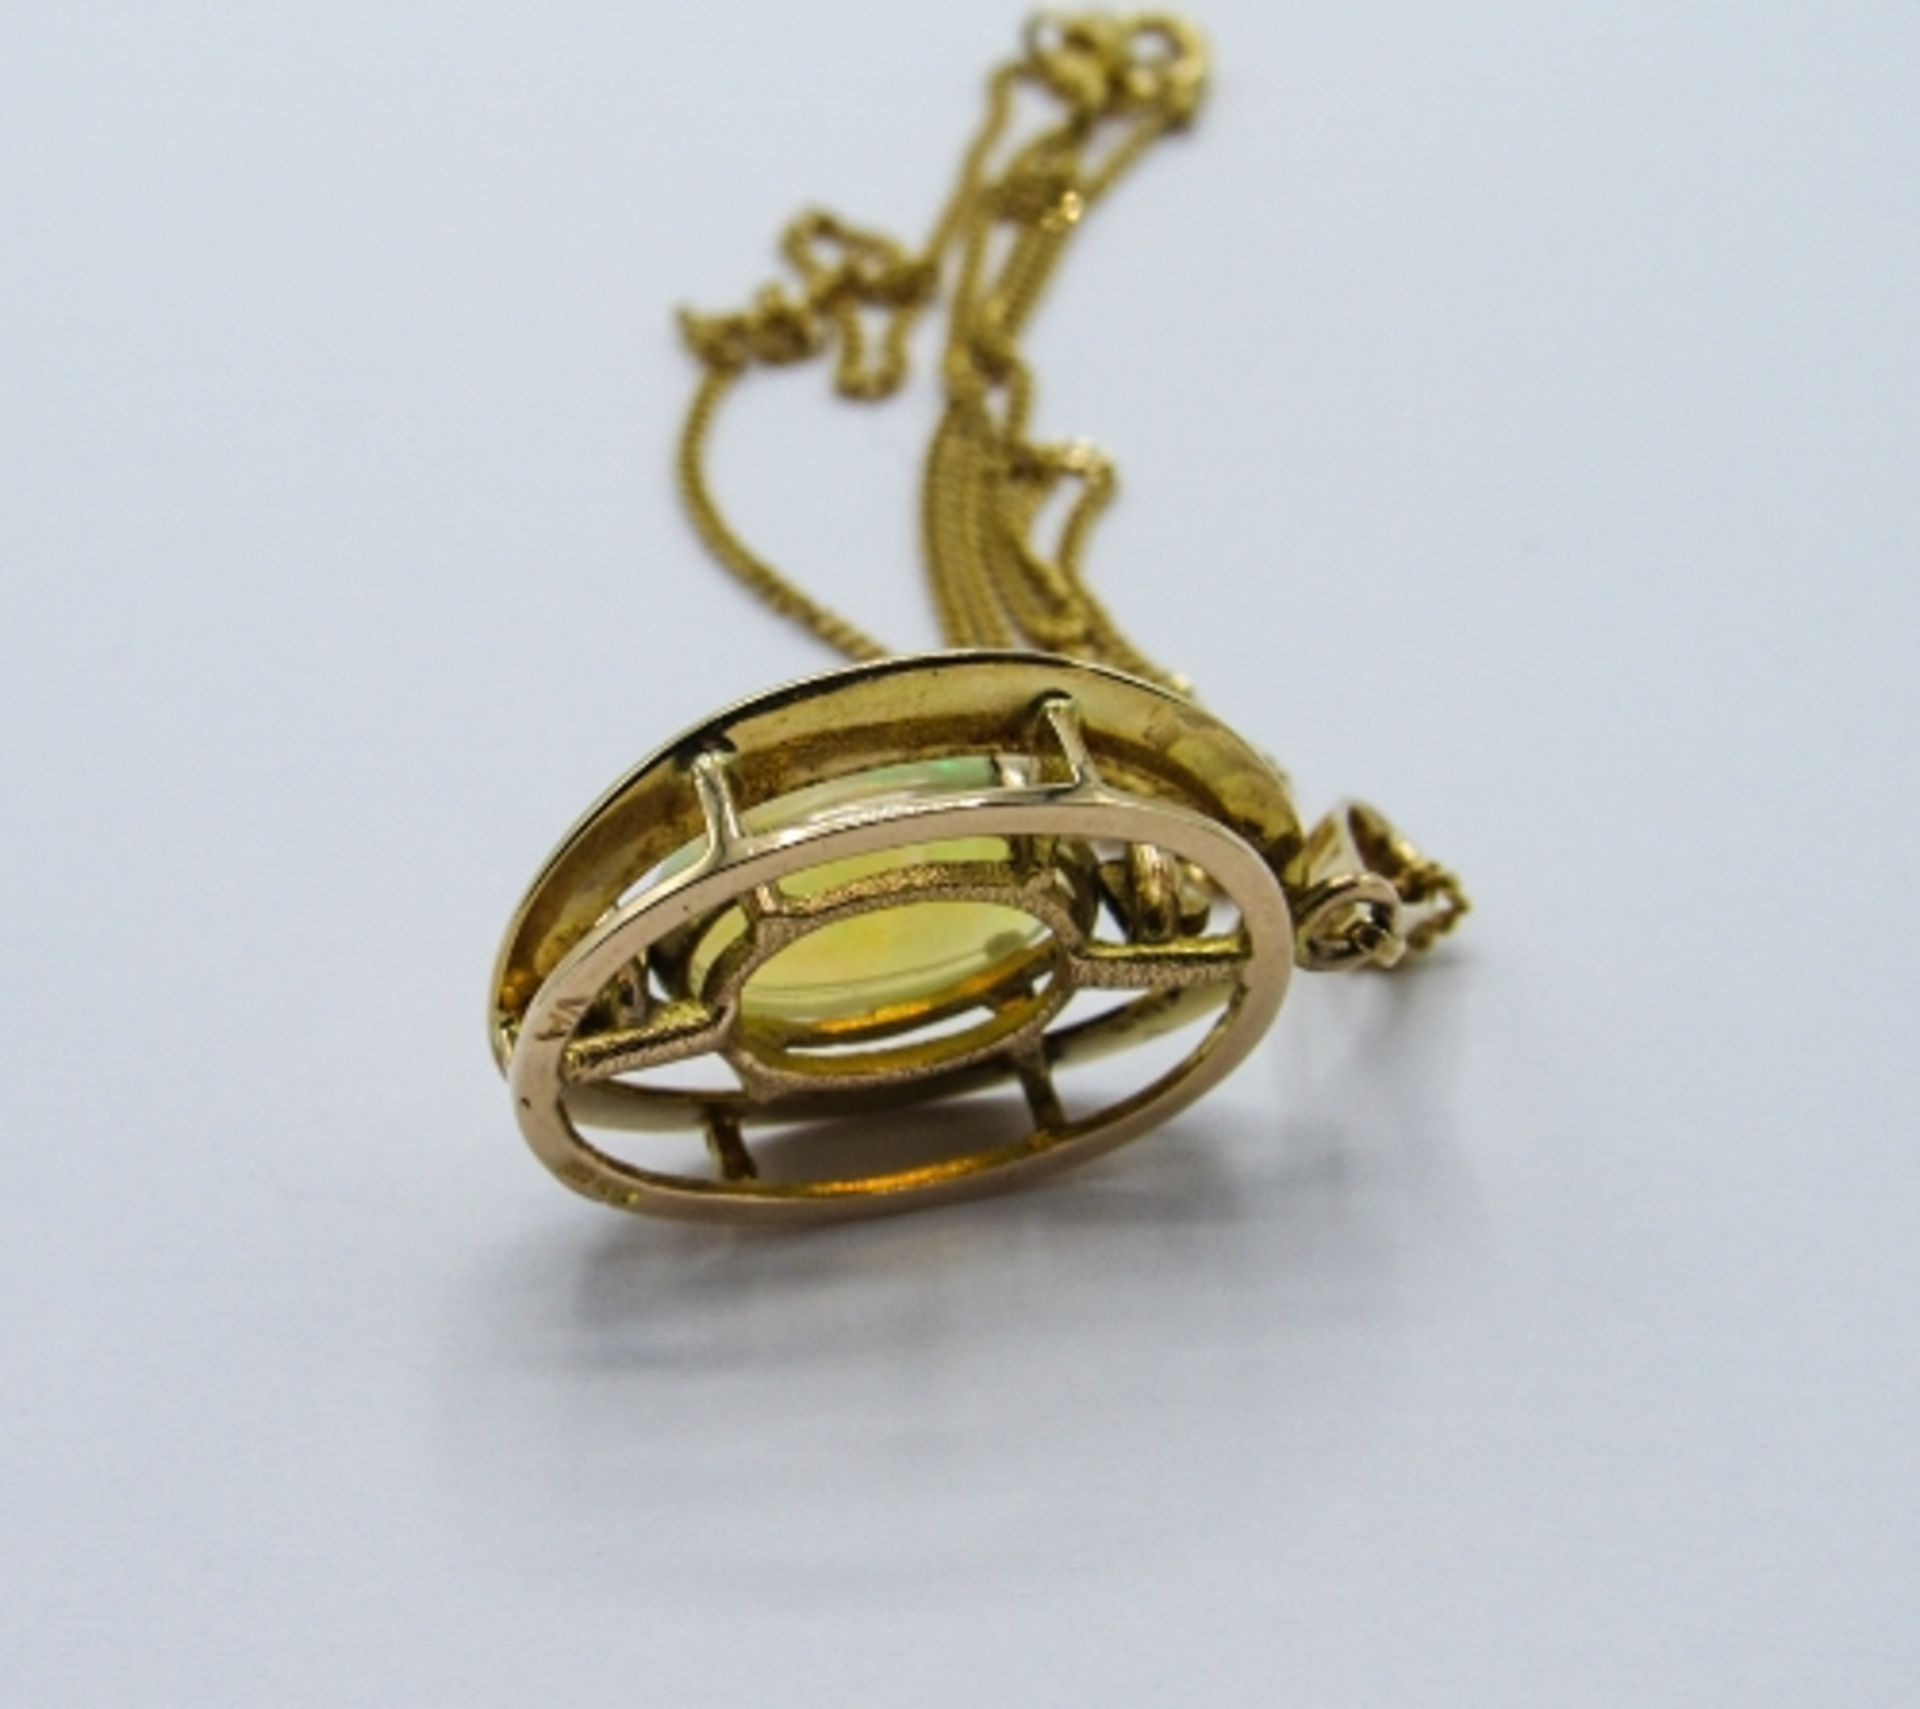 9ct gold opal pendant on a 9ct gold chain, weight 5.7gms. Estimate £325-350 - Image 3 of 3